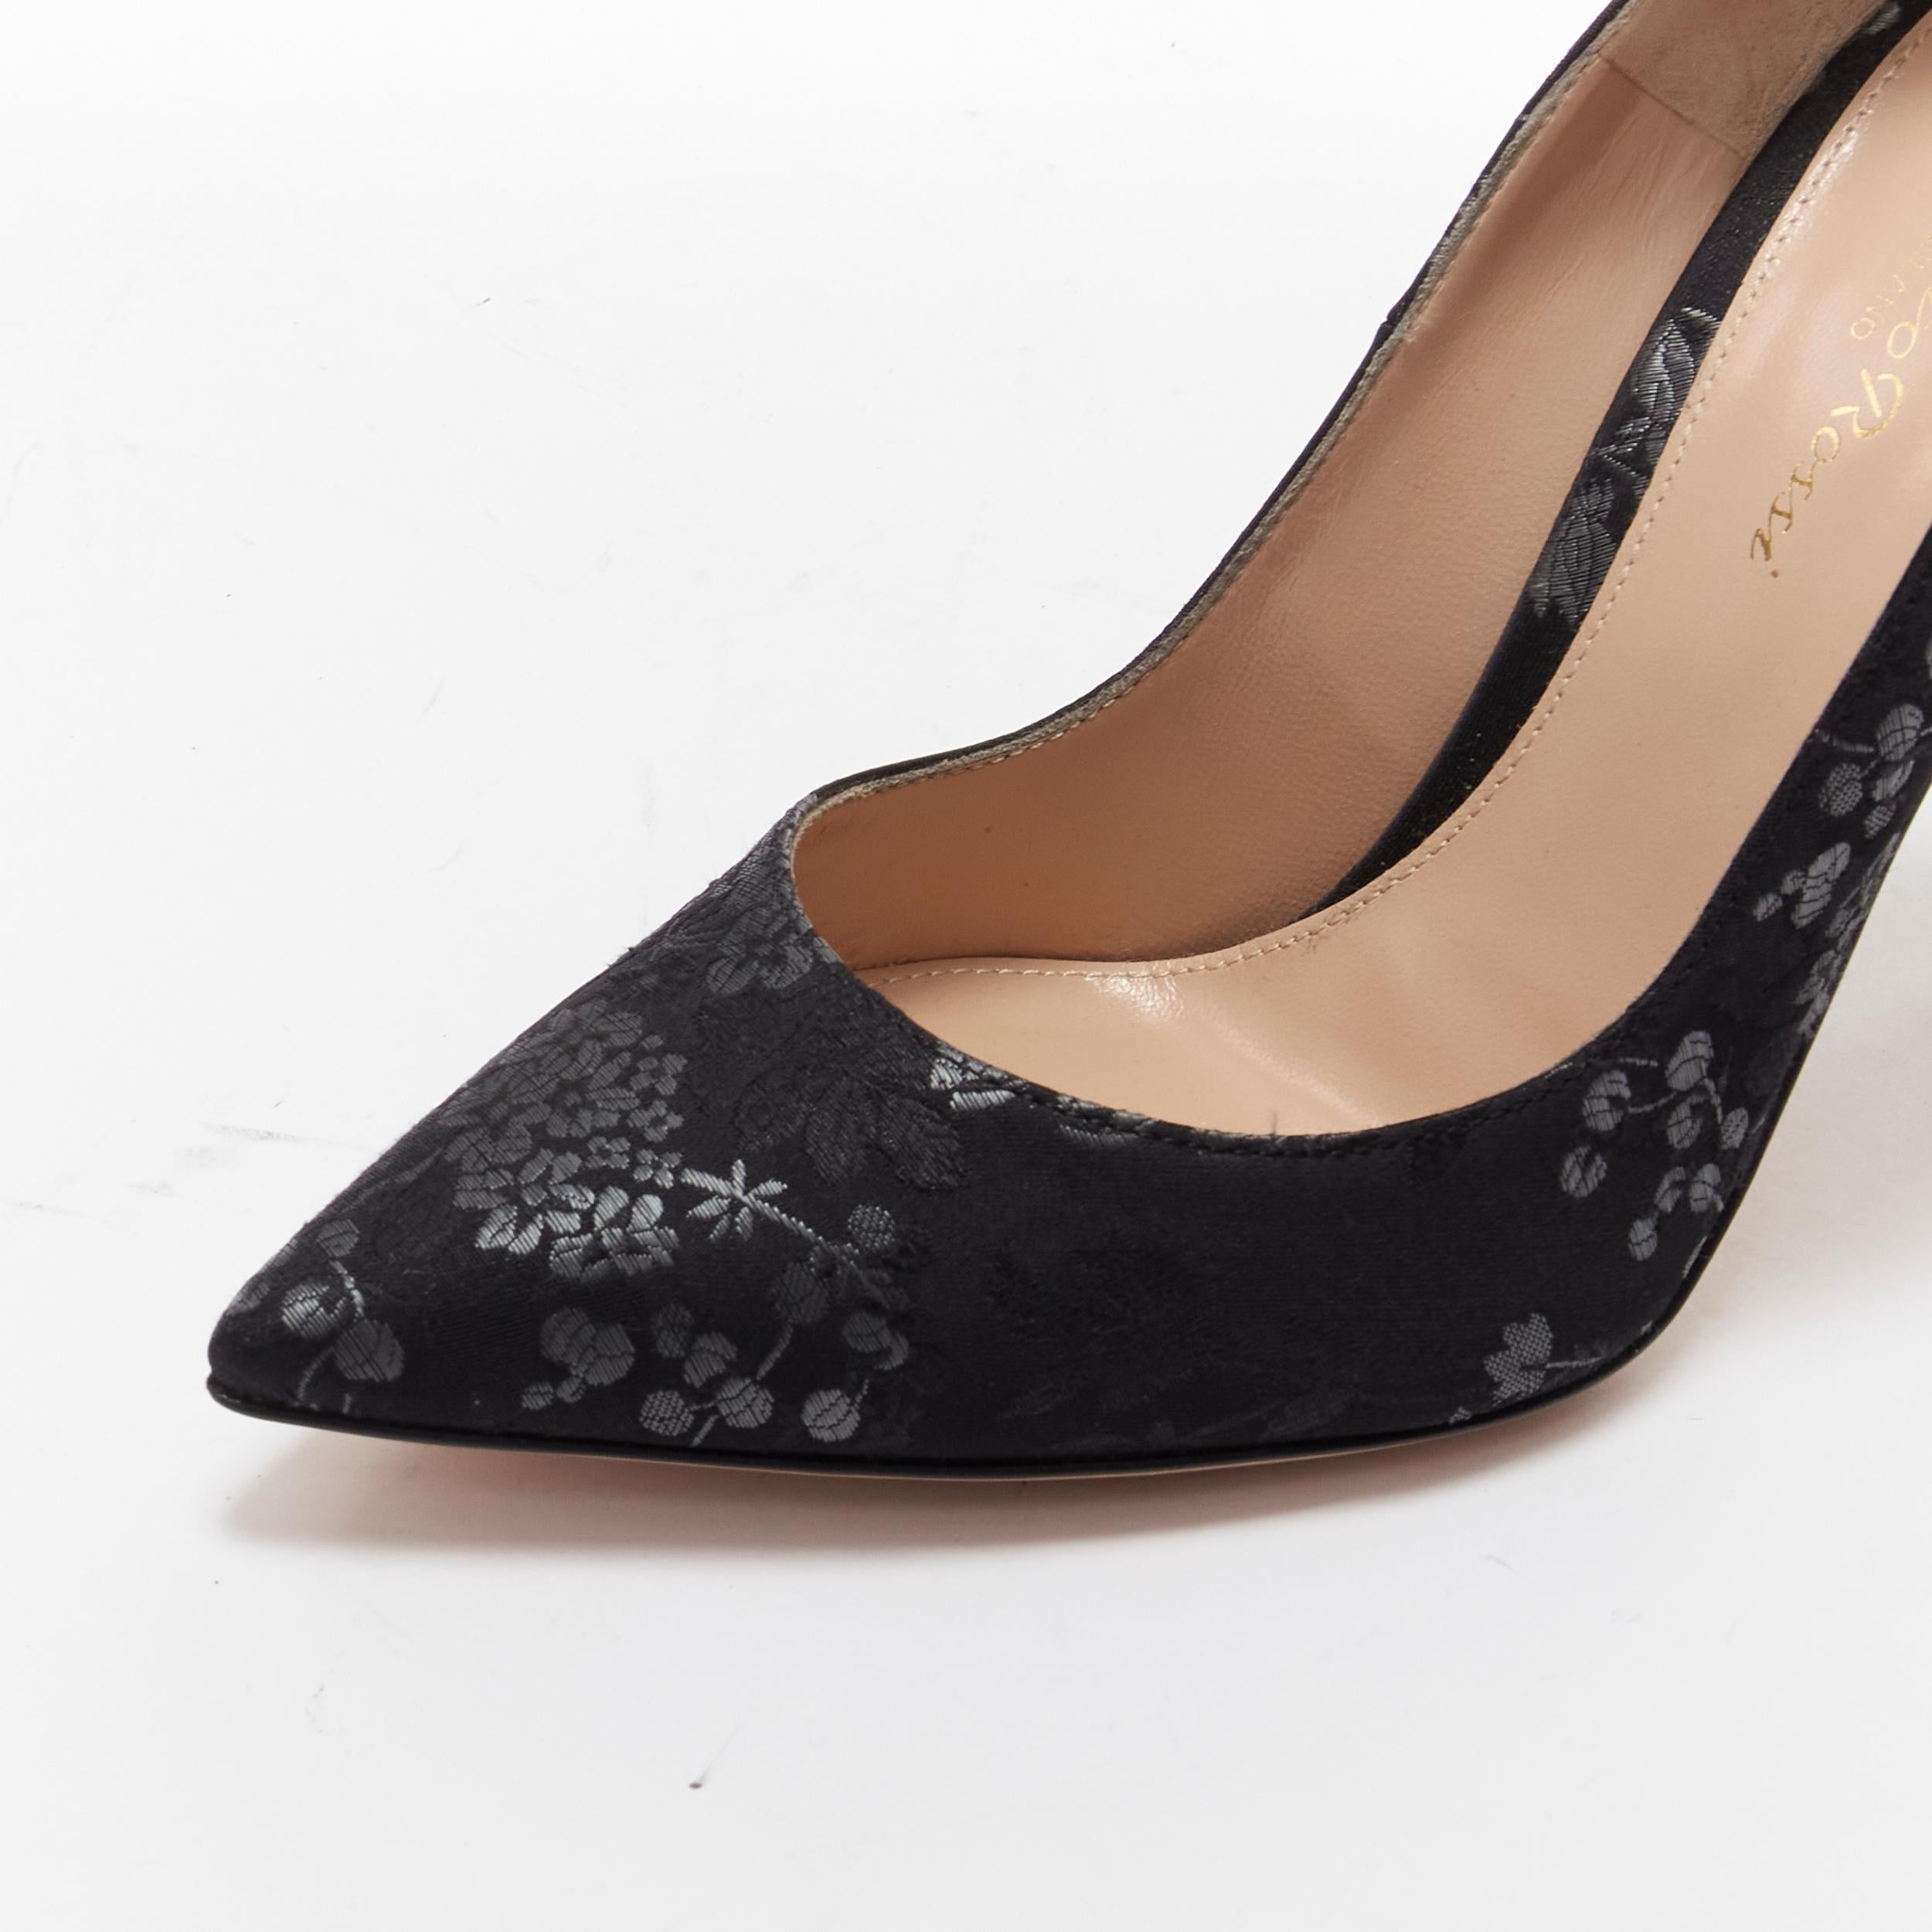 GIANVITO ROSSI black grey floral jacquard classic pigalle pump heels EU37.5 For Sale 2